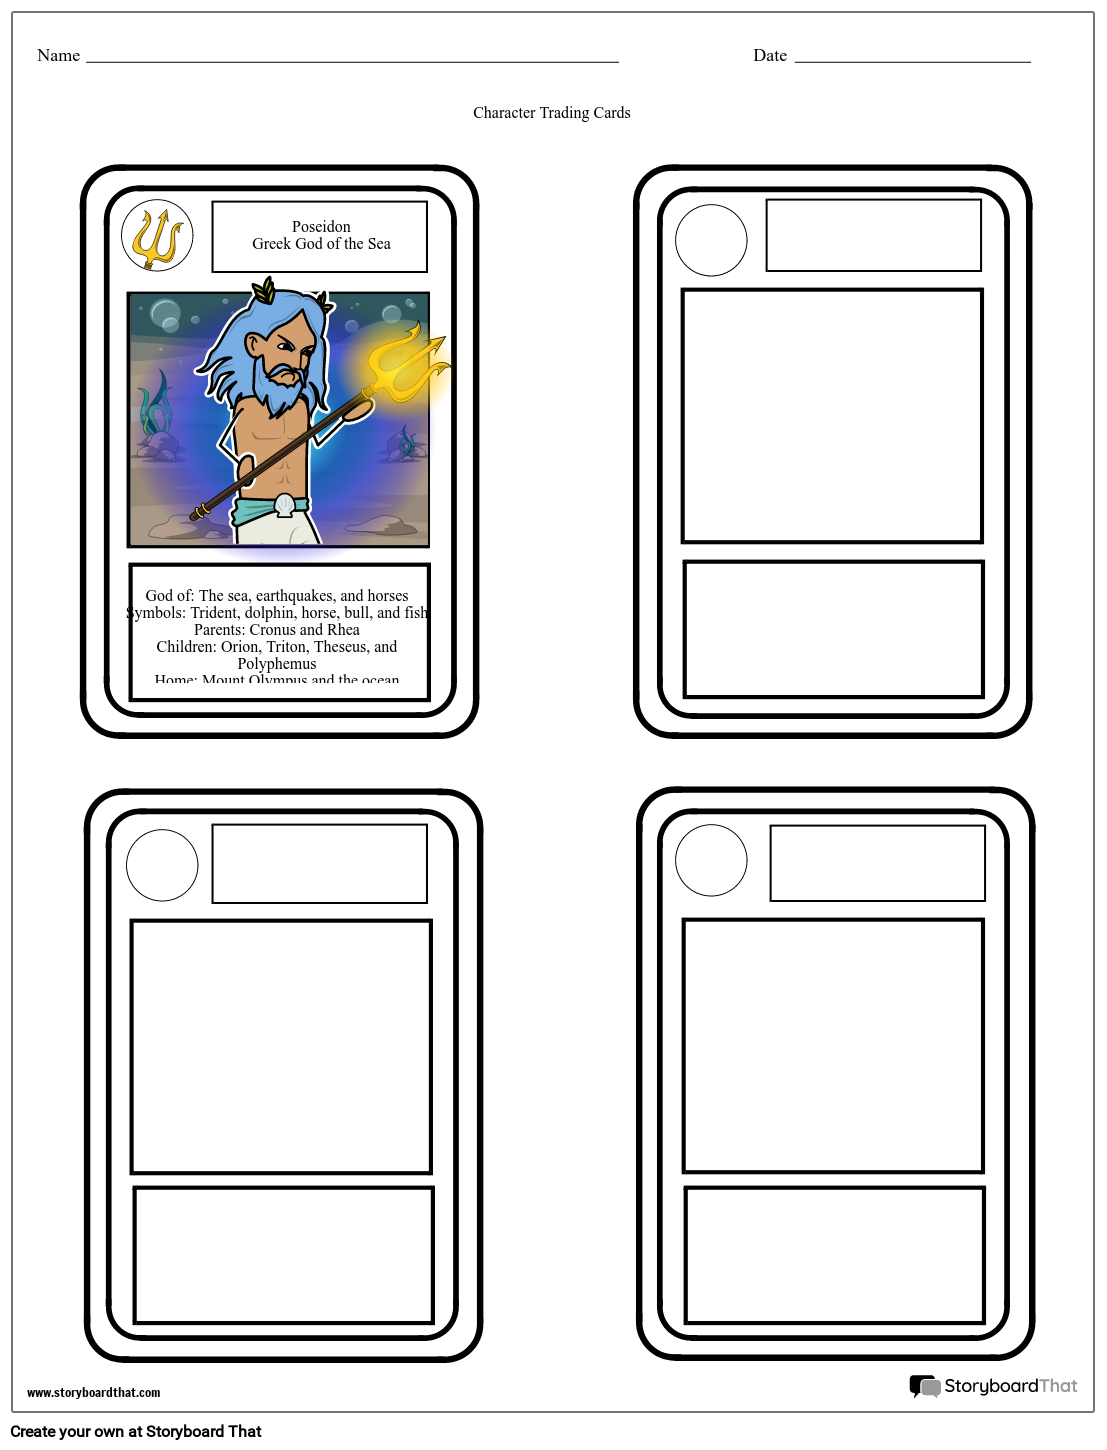 printable-trading-card-template